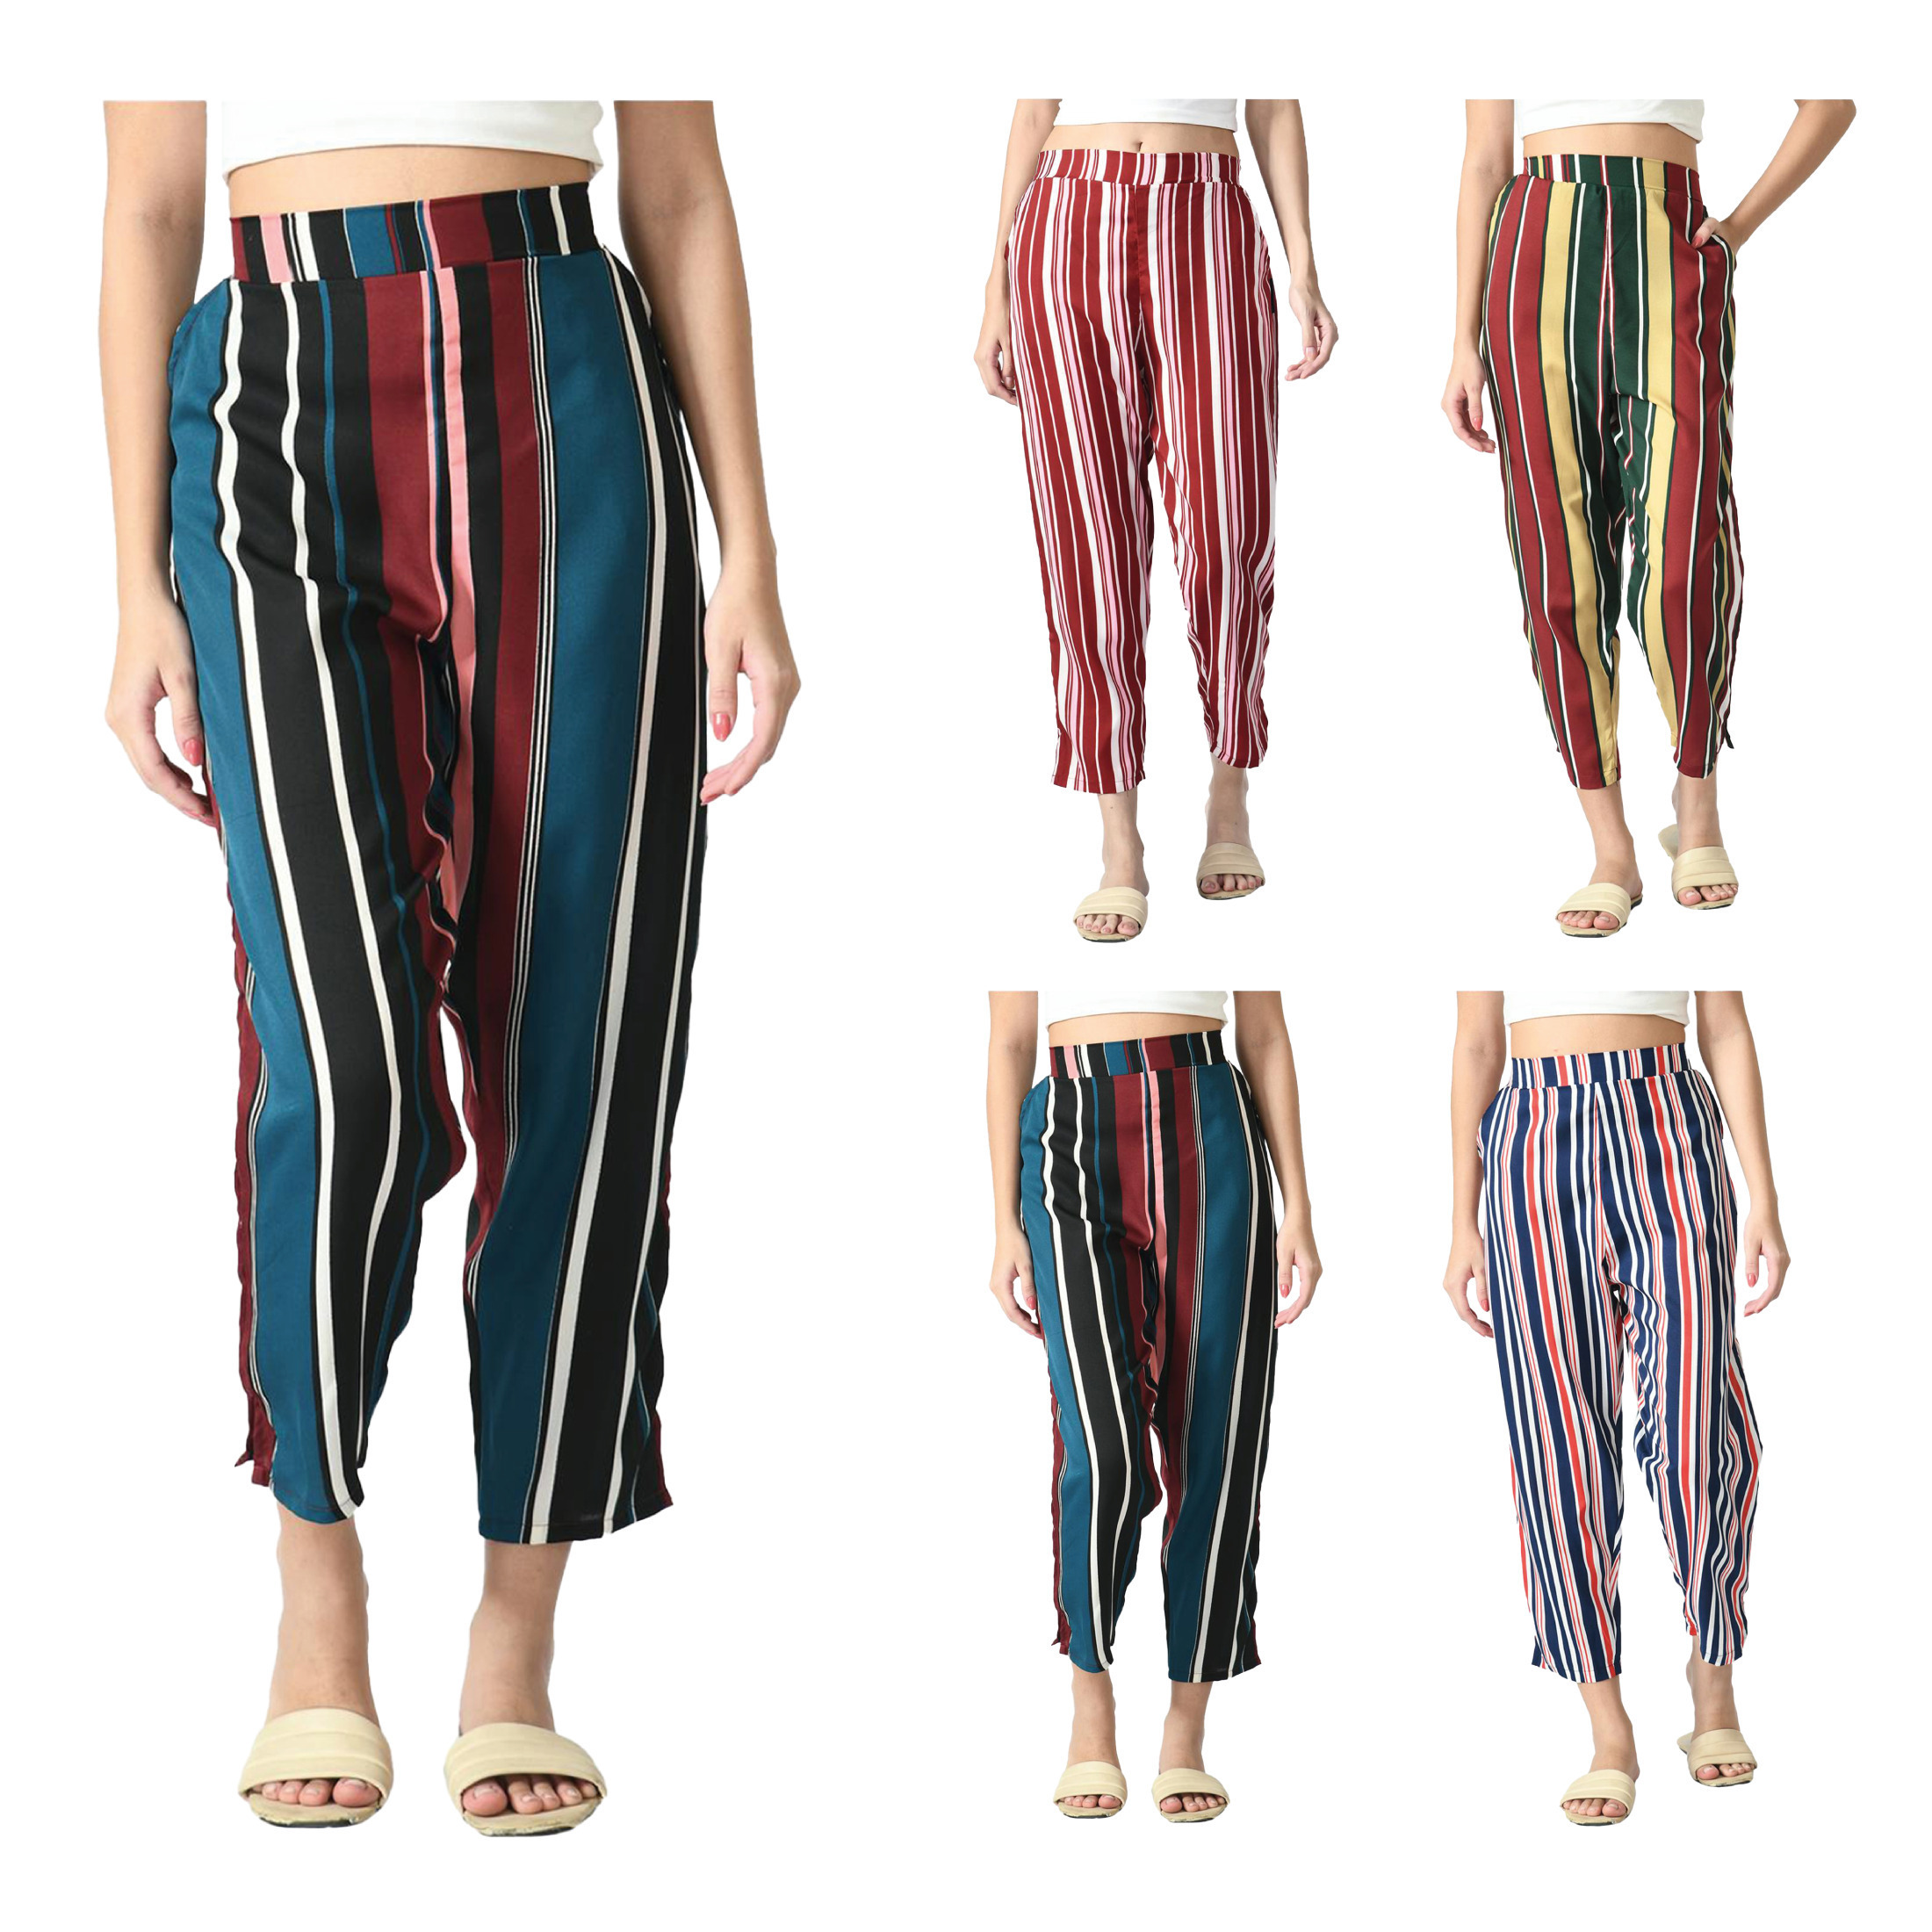 3-Pack Women's Cotton Palazzo Pants Striped Print Soft & Comfortable Western Style Regular Fit Ladies Trouser - XXL